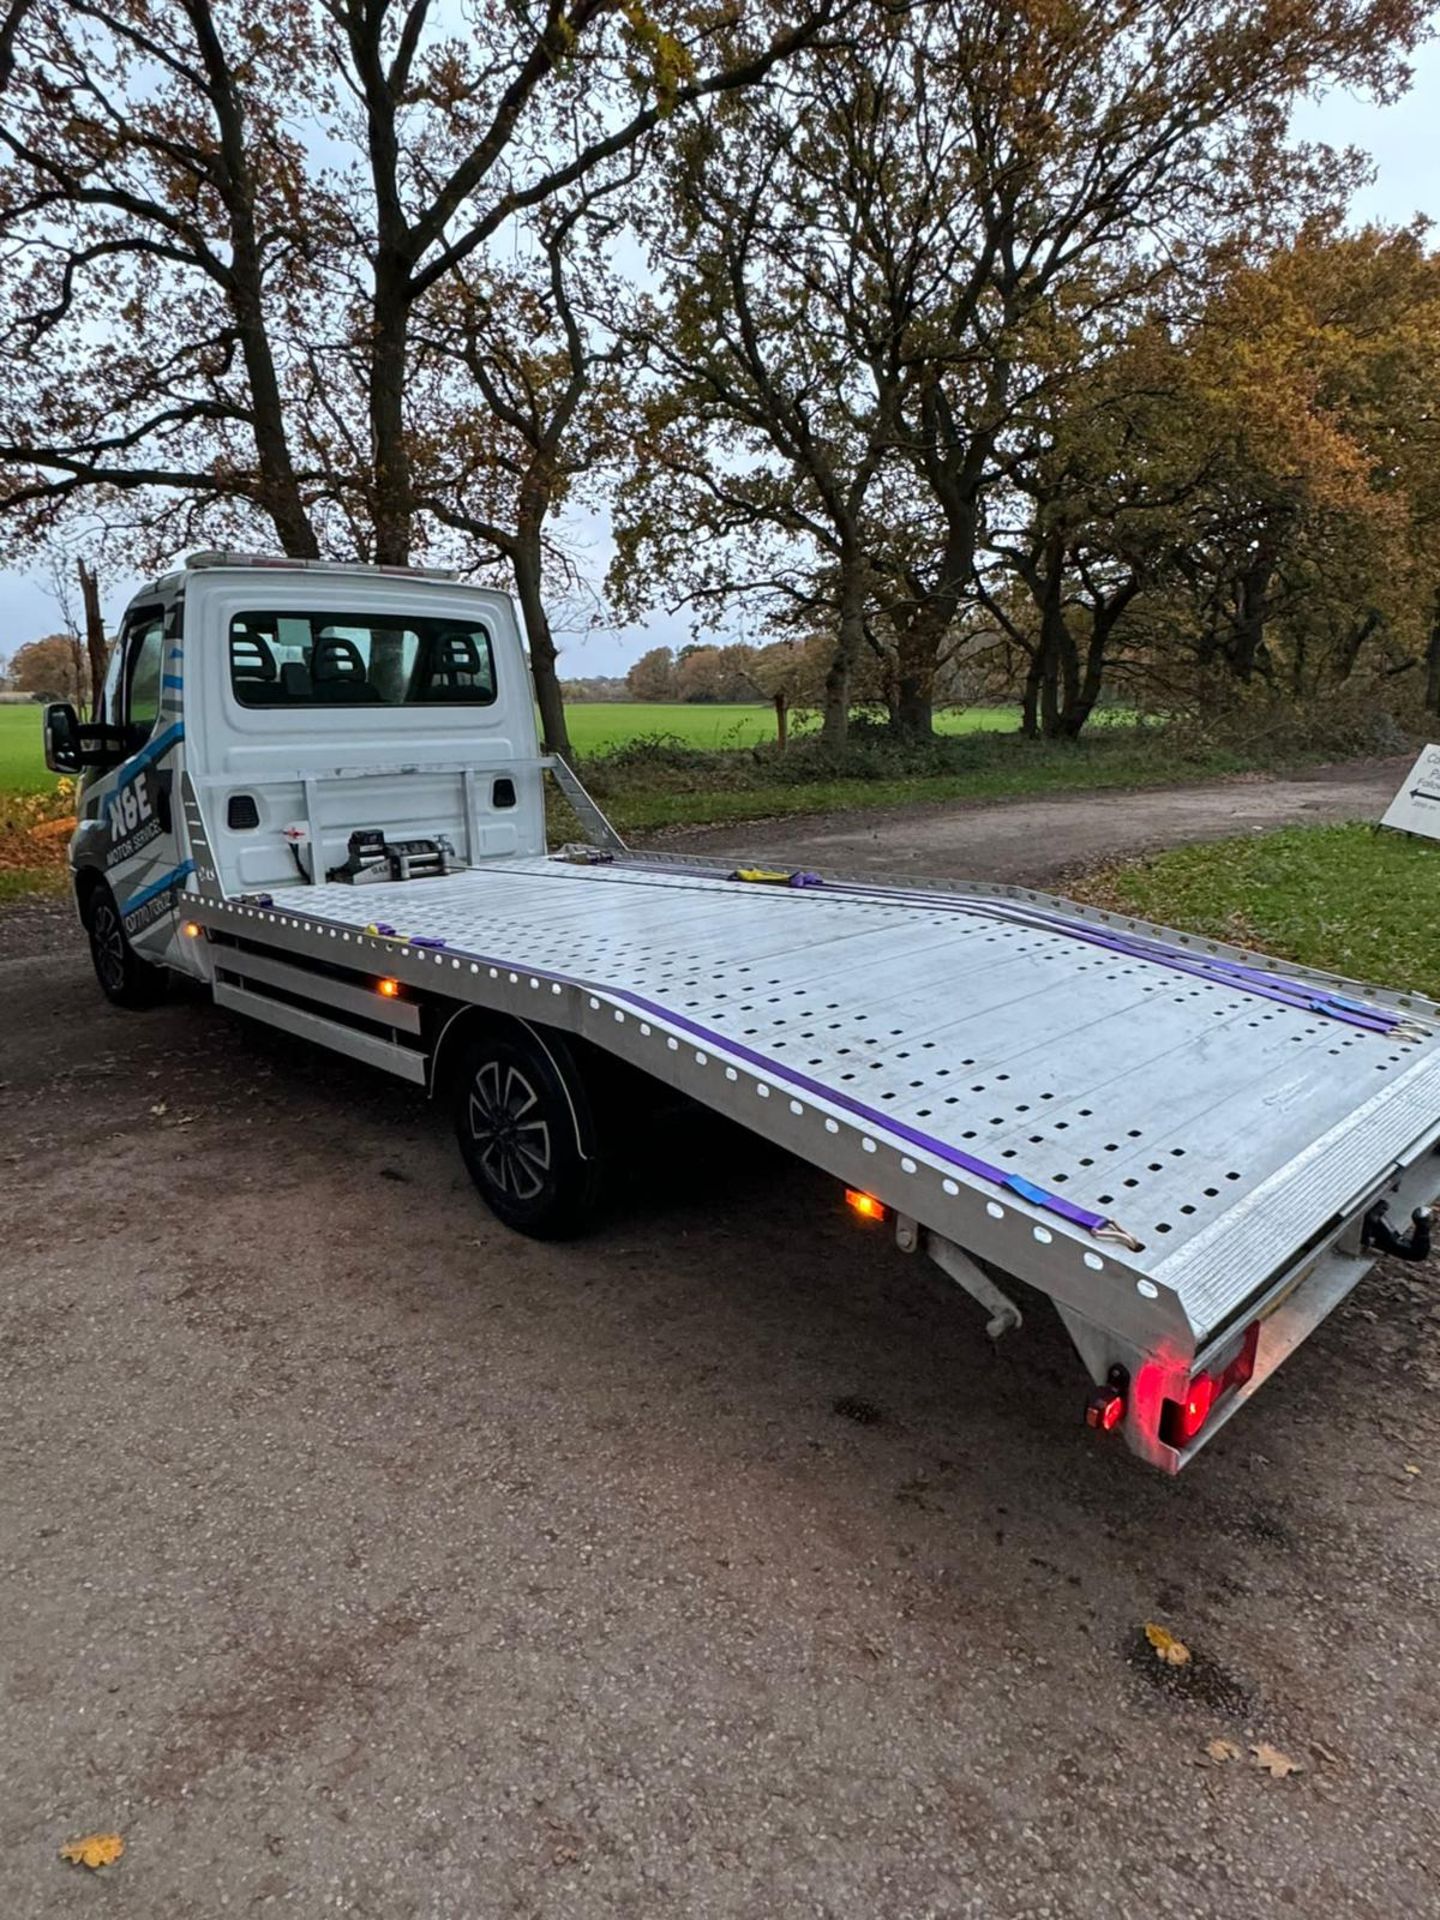 2018 18 IVECO DAILY RECOVERY TRUCK - 3.5 TON - LWB CHASSIS 3750 WHEE BASE - 127K MILES - Image 10 of 10